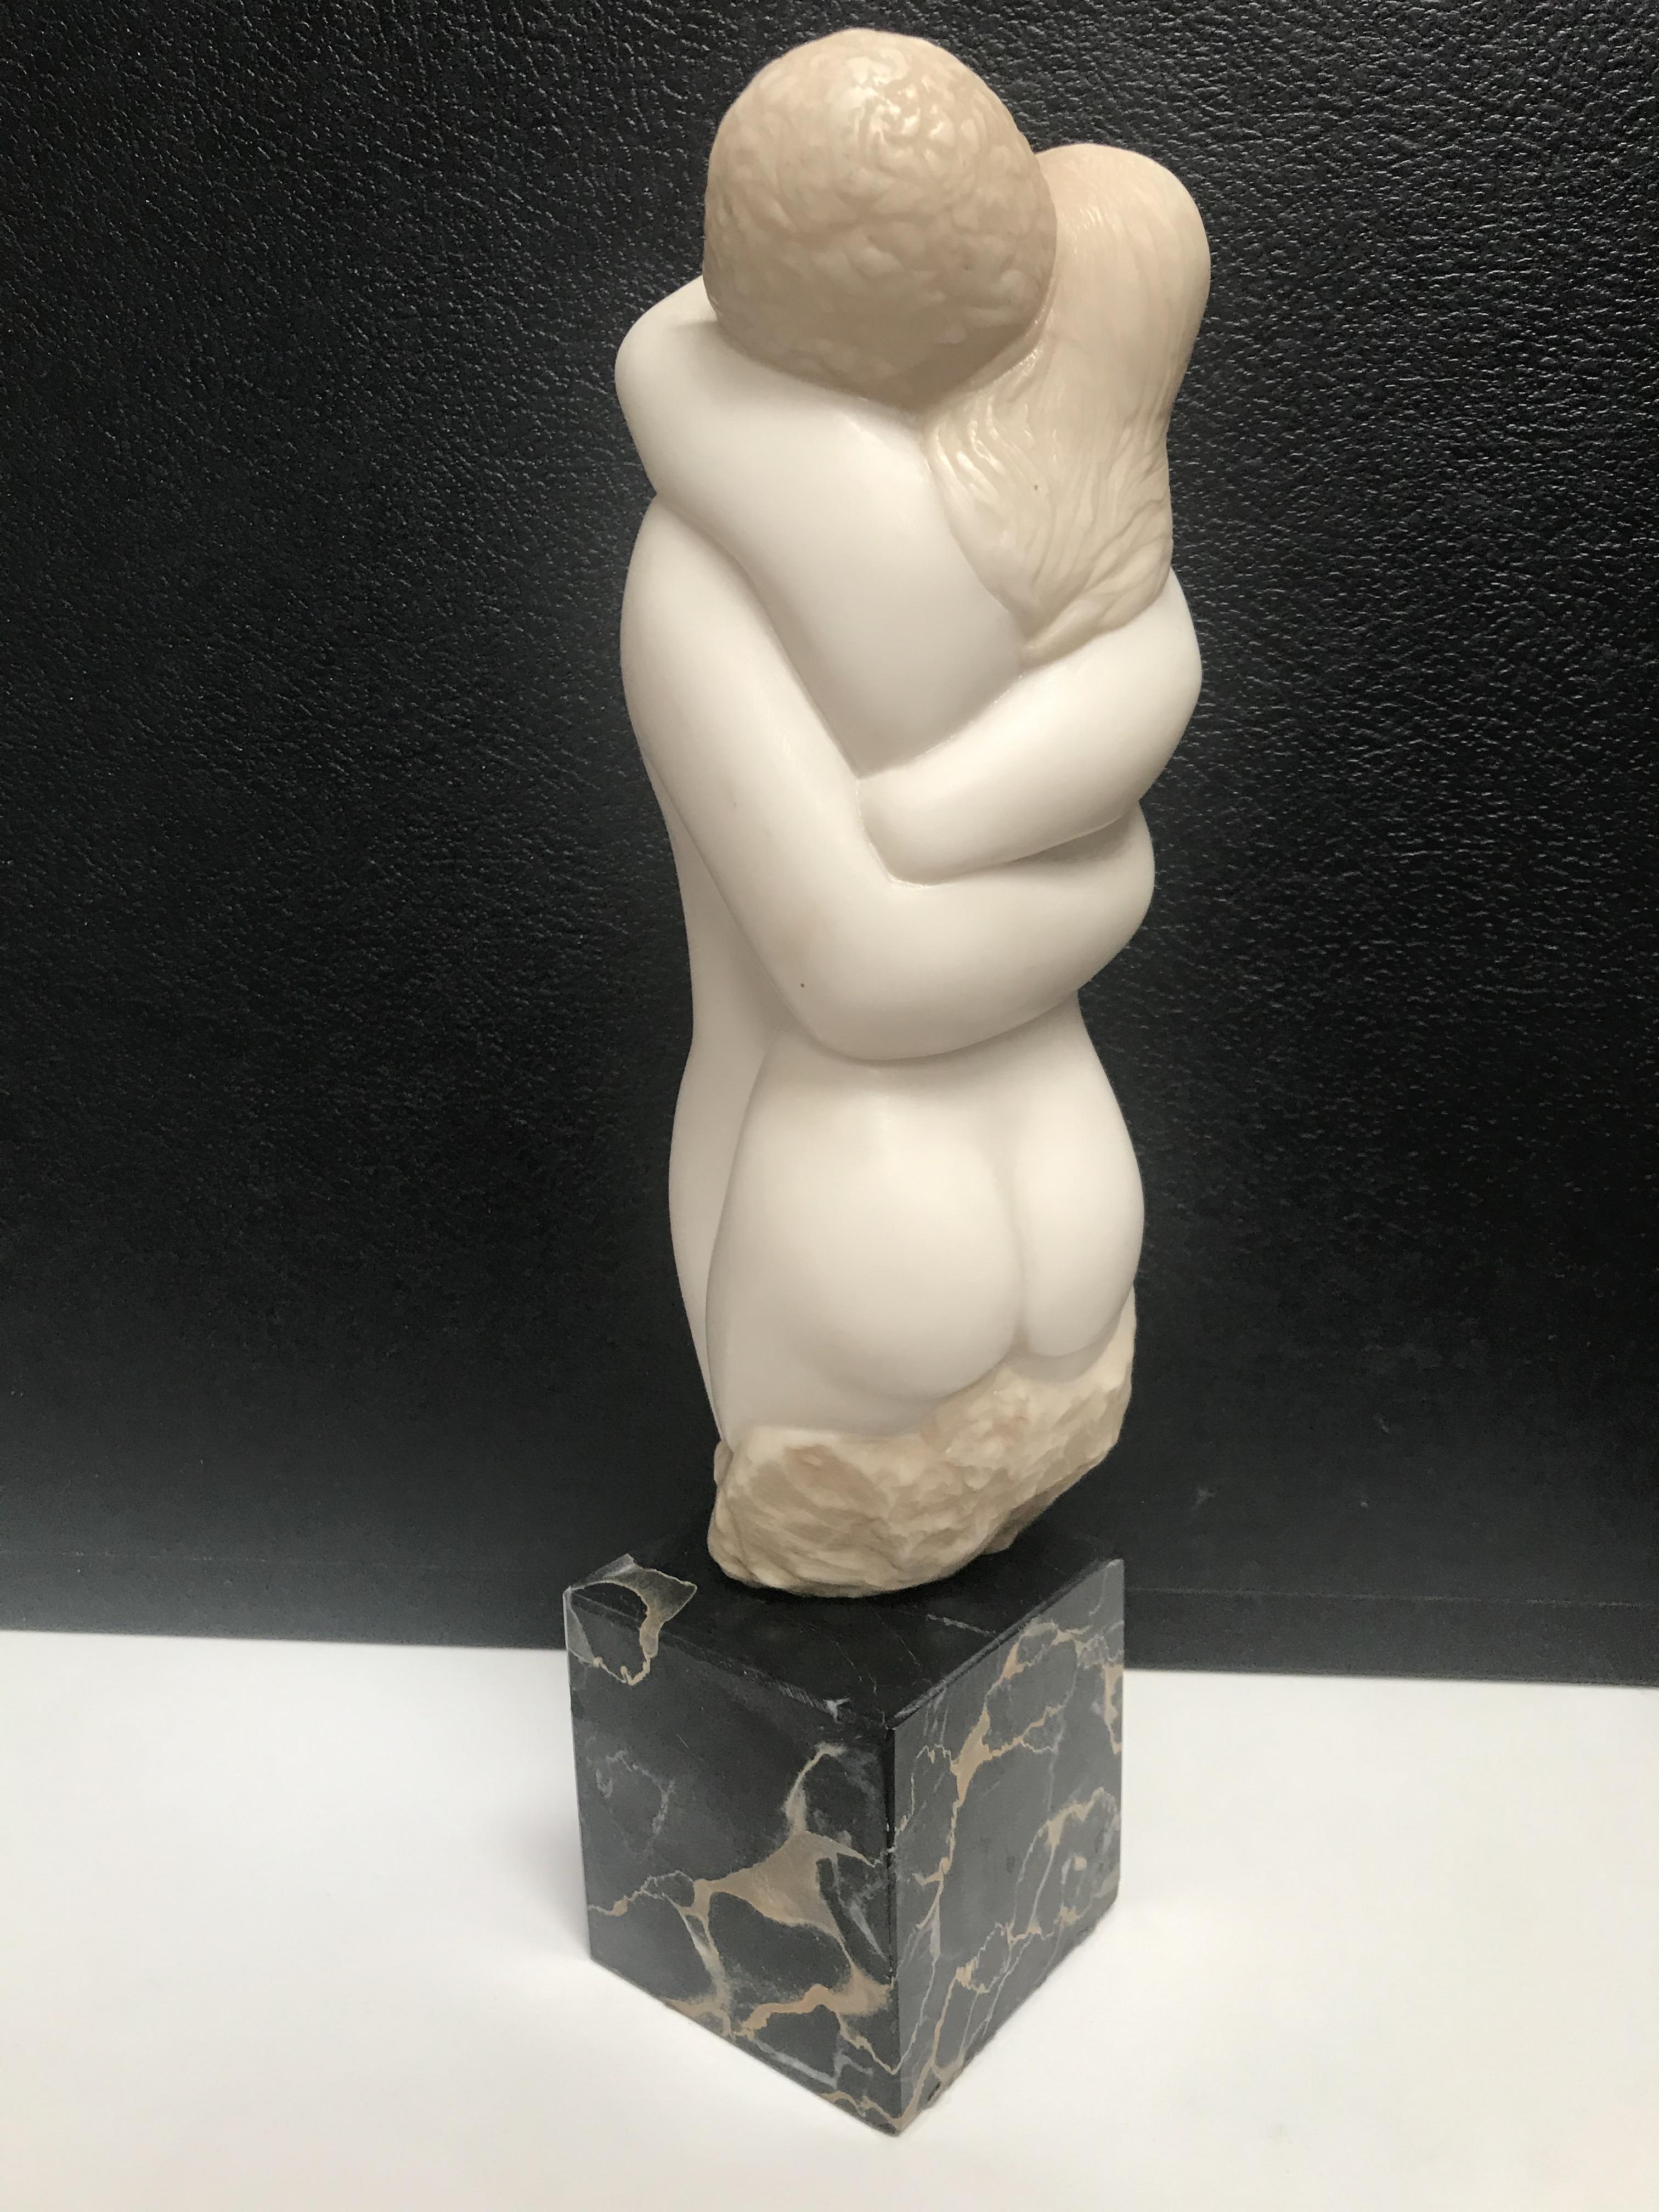 Mid-Century Modern Resin Sculpture of an Embracing Couple/